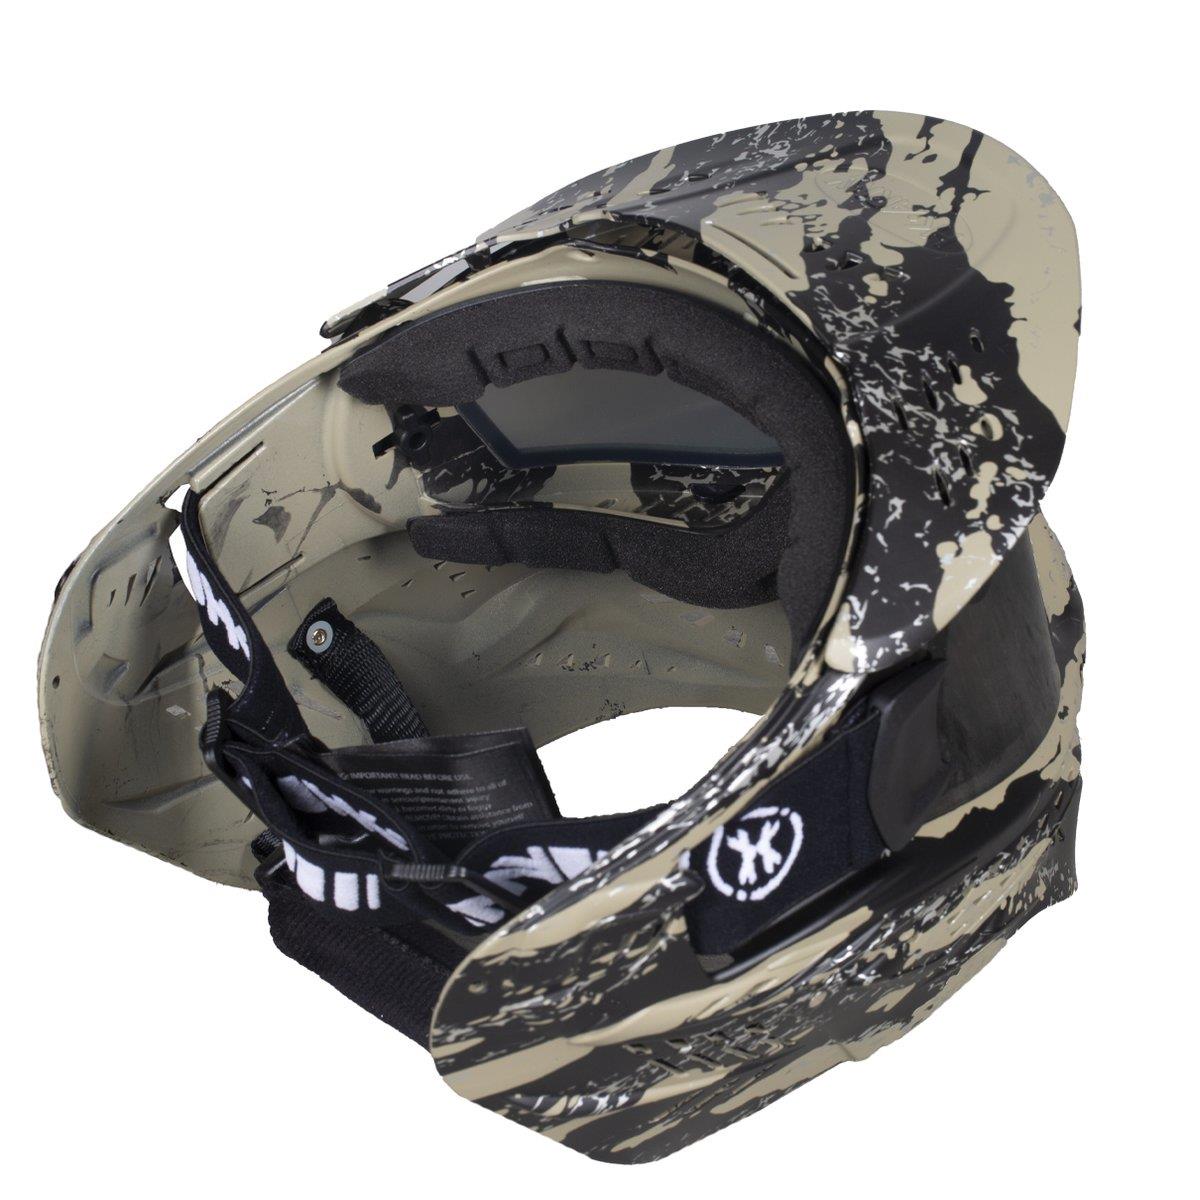 HK Army HSTL Goggle Thermal Dual Paned Paintball Mask - Fracture Black/Tan HK Army